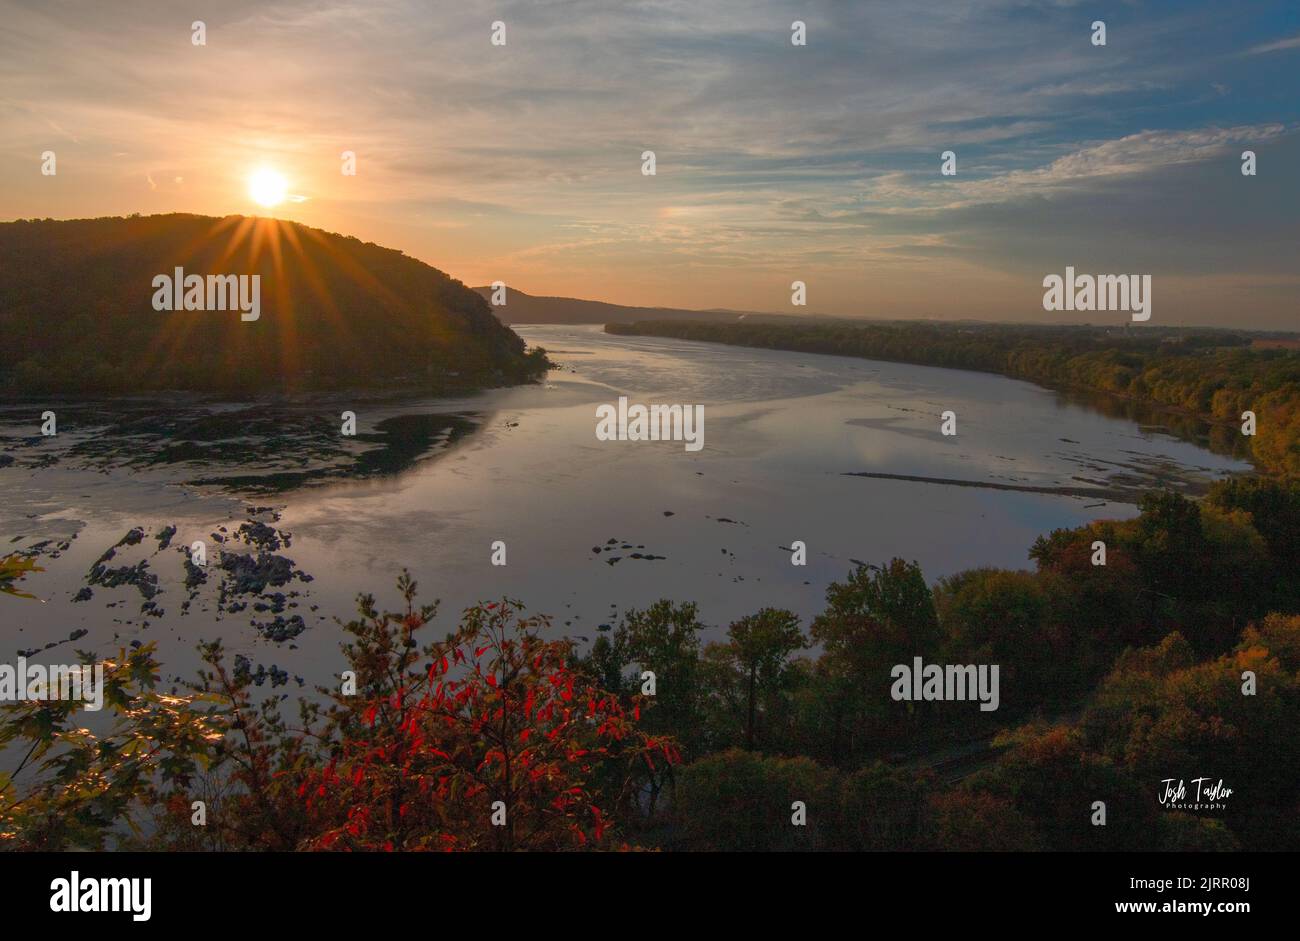 A beautiful view of sunset on the Susquehanna River Stock Photo